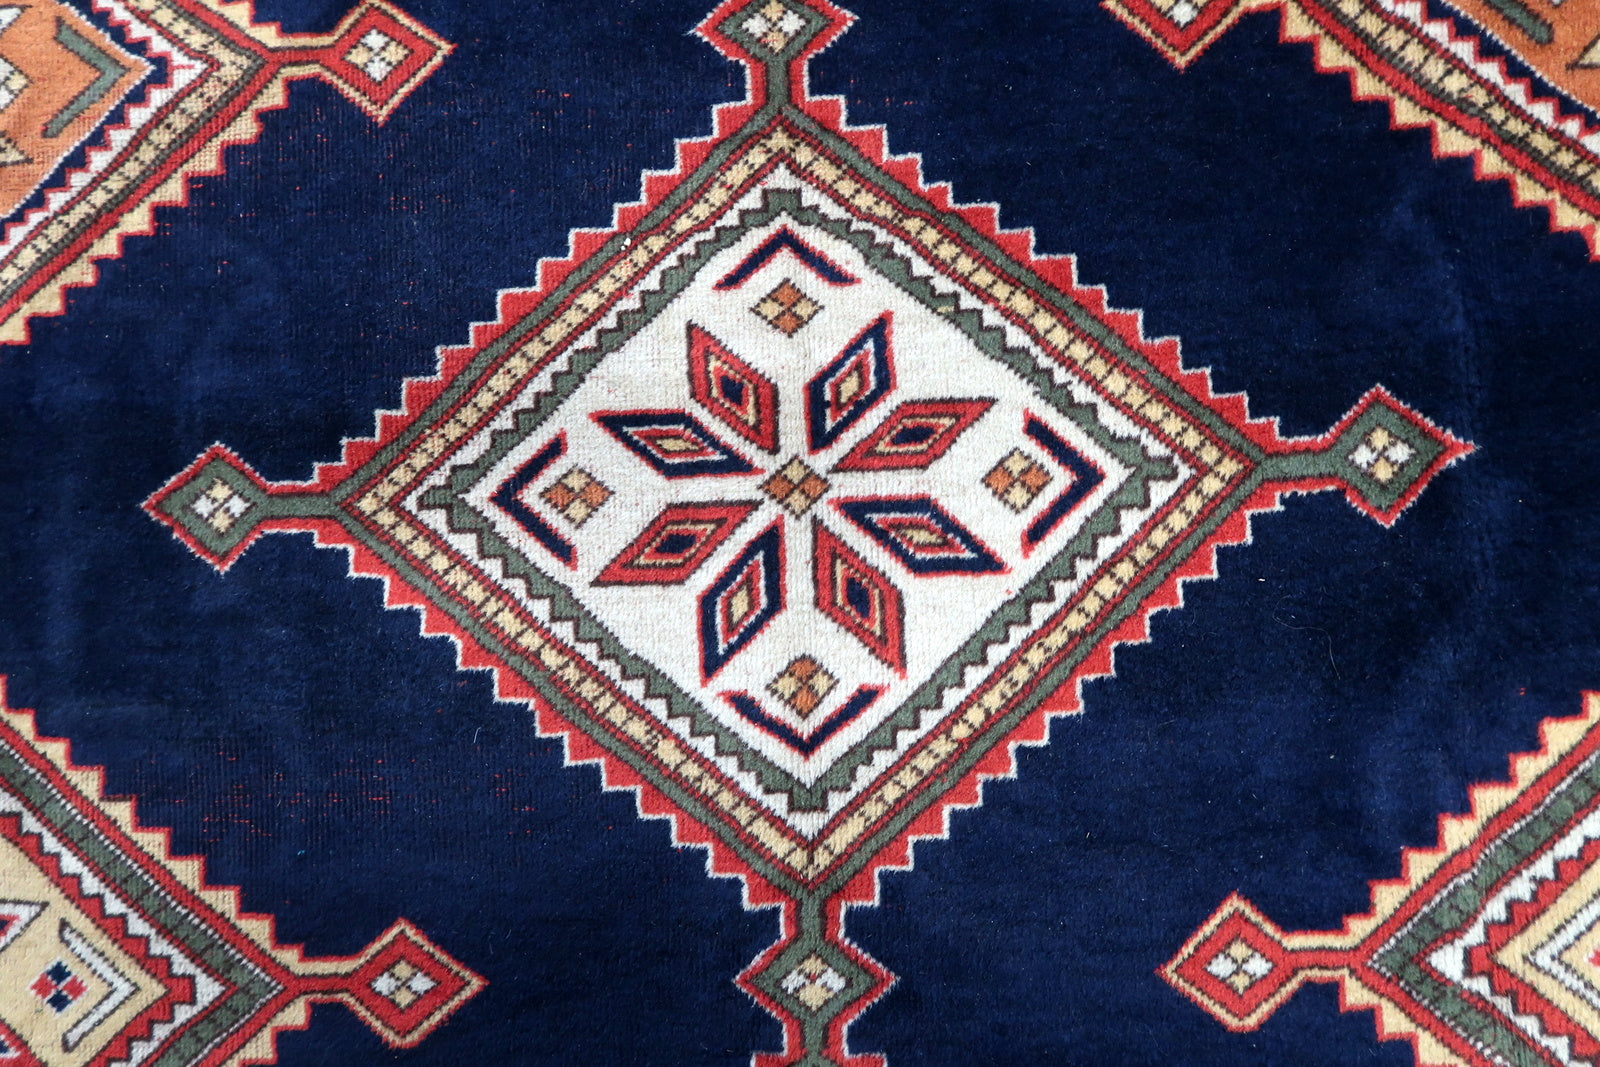 Detailed view of the complex designs in the border, combining floral motifs and geometric shapes